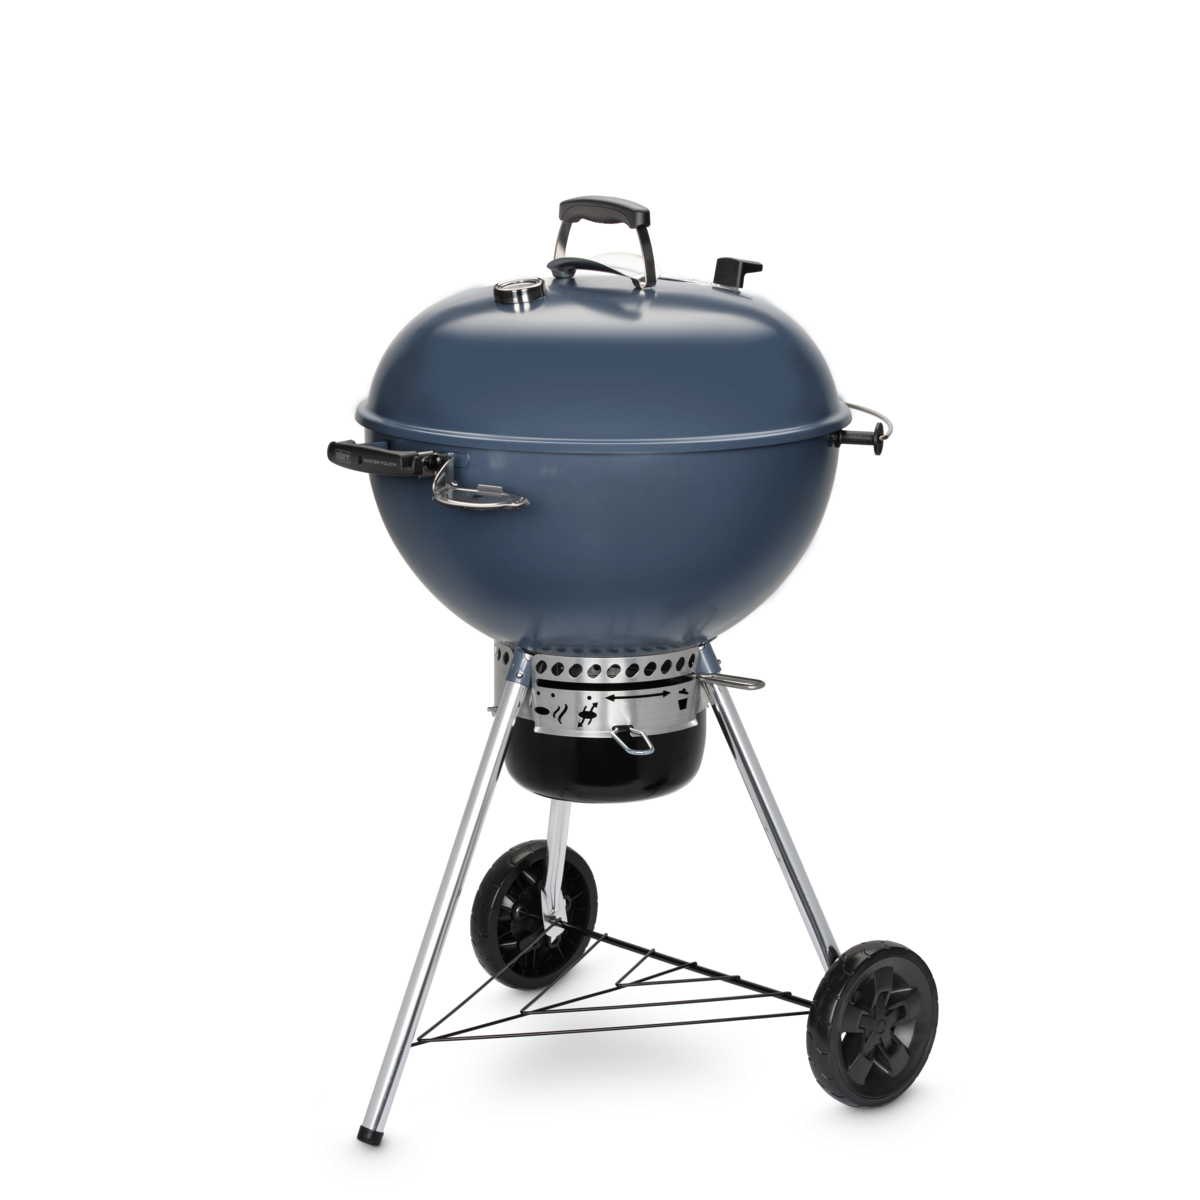 WEBER MASTER TOUCH C-5750 GBS charcoal grill 57 cm slate blue, 14713004